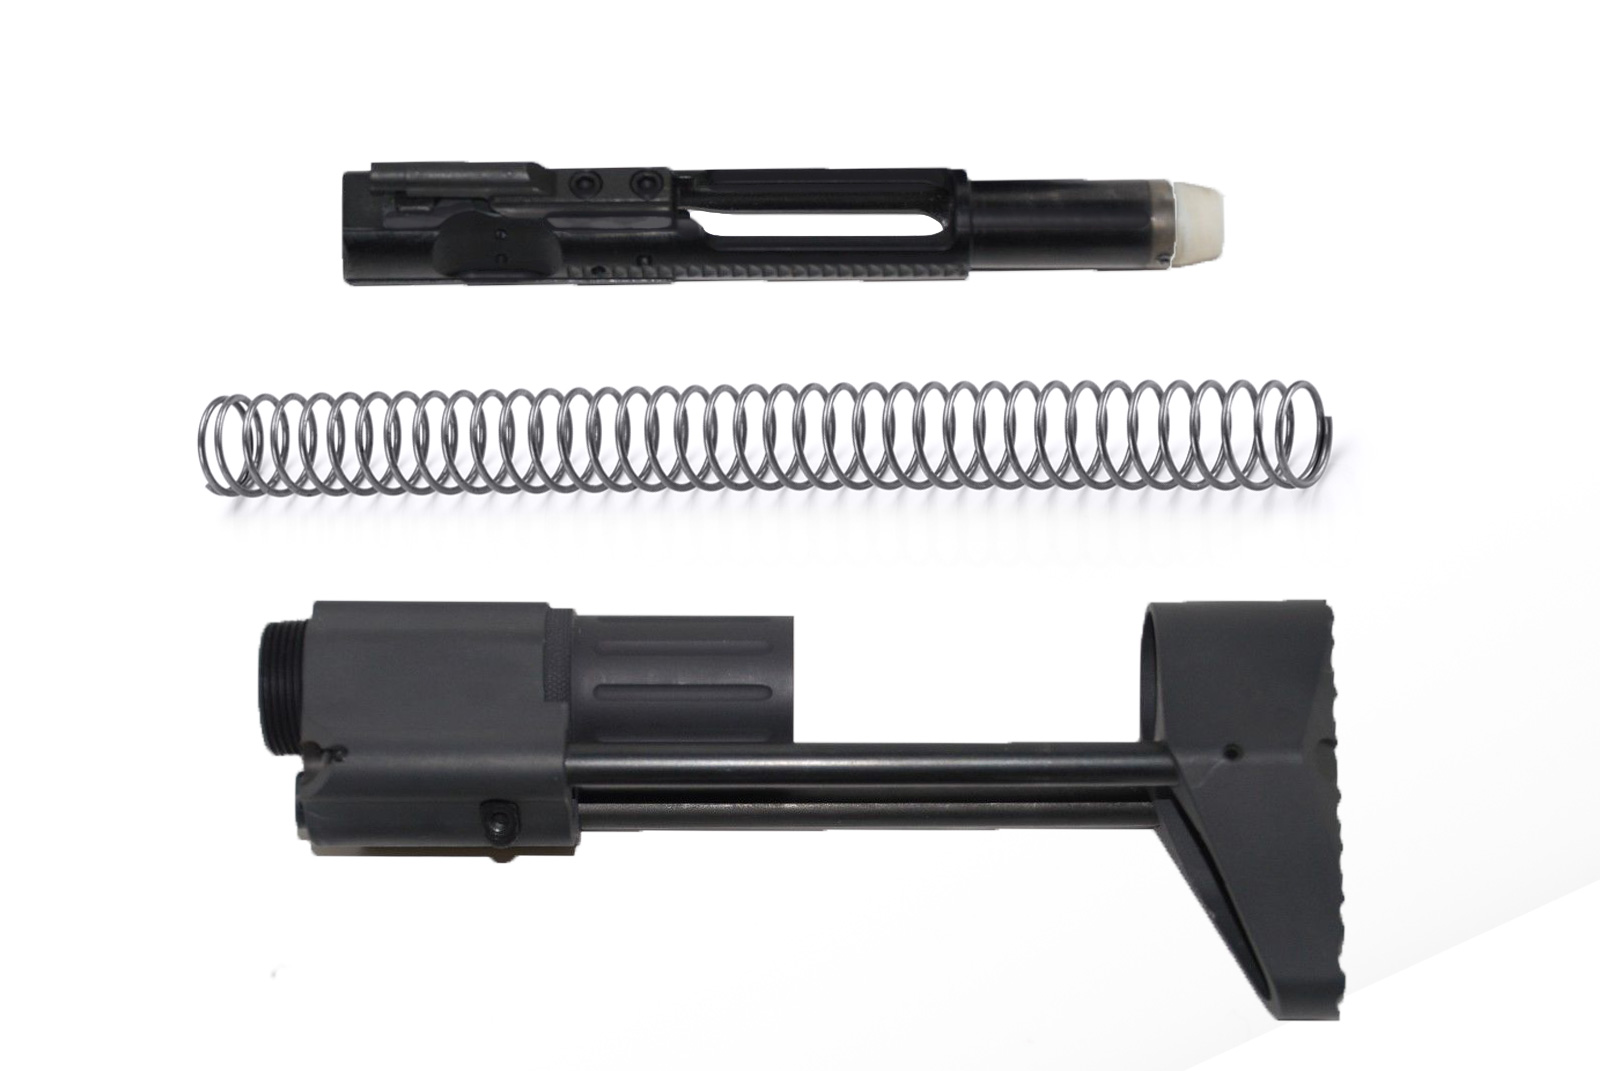 North Eastern Arms NEA CCS Compact Carbine Collapsible AR15/M4 PDW Stock Kit